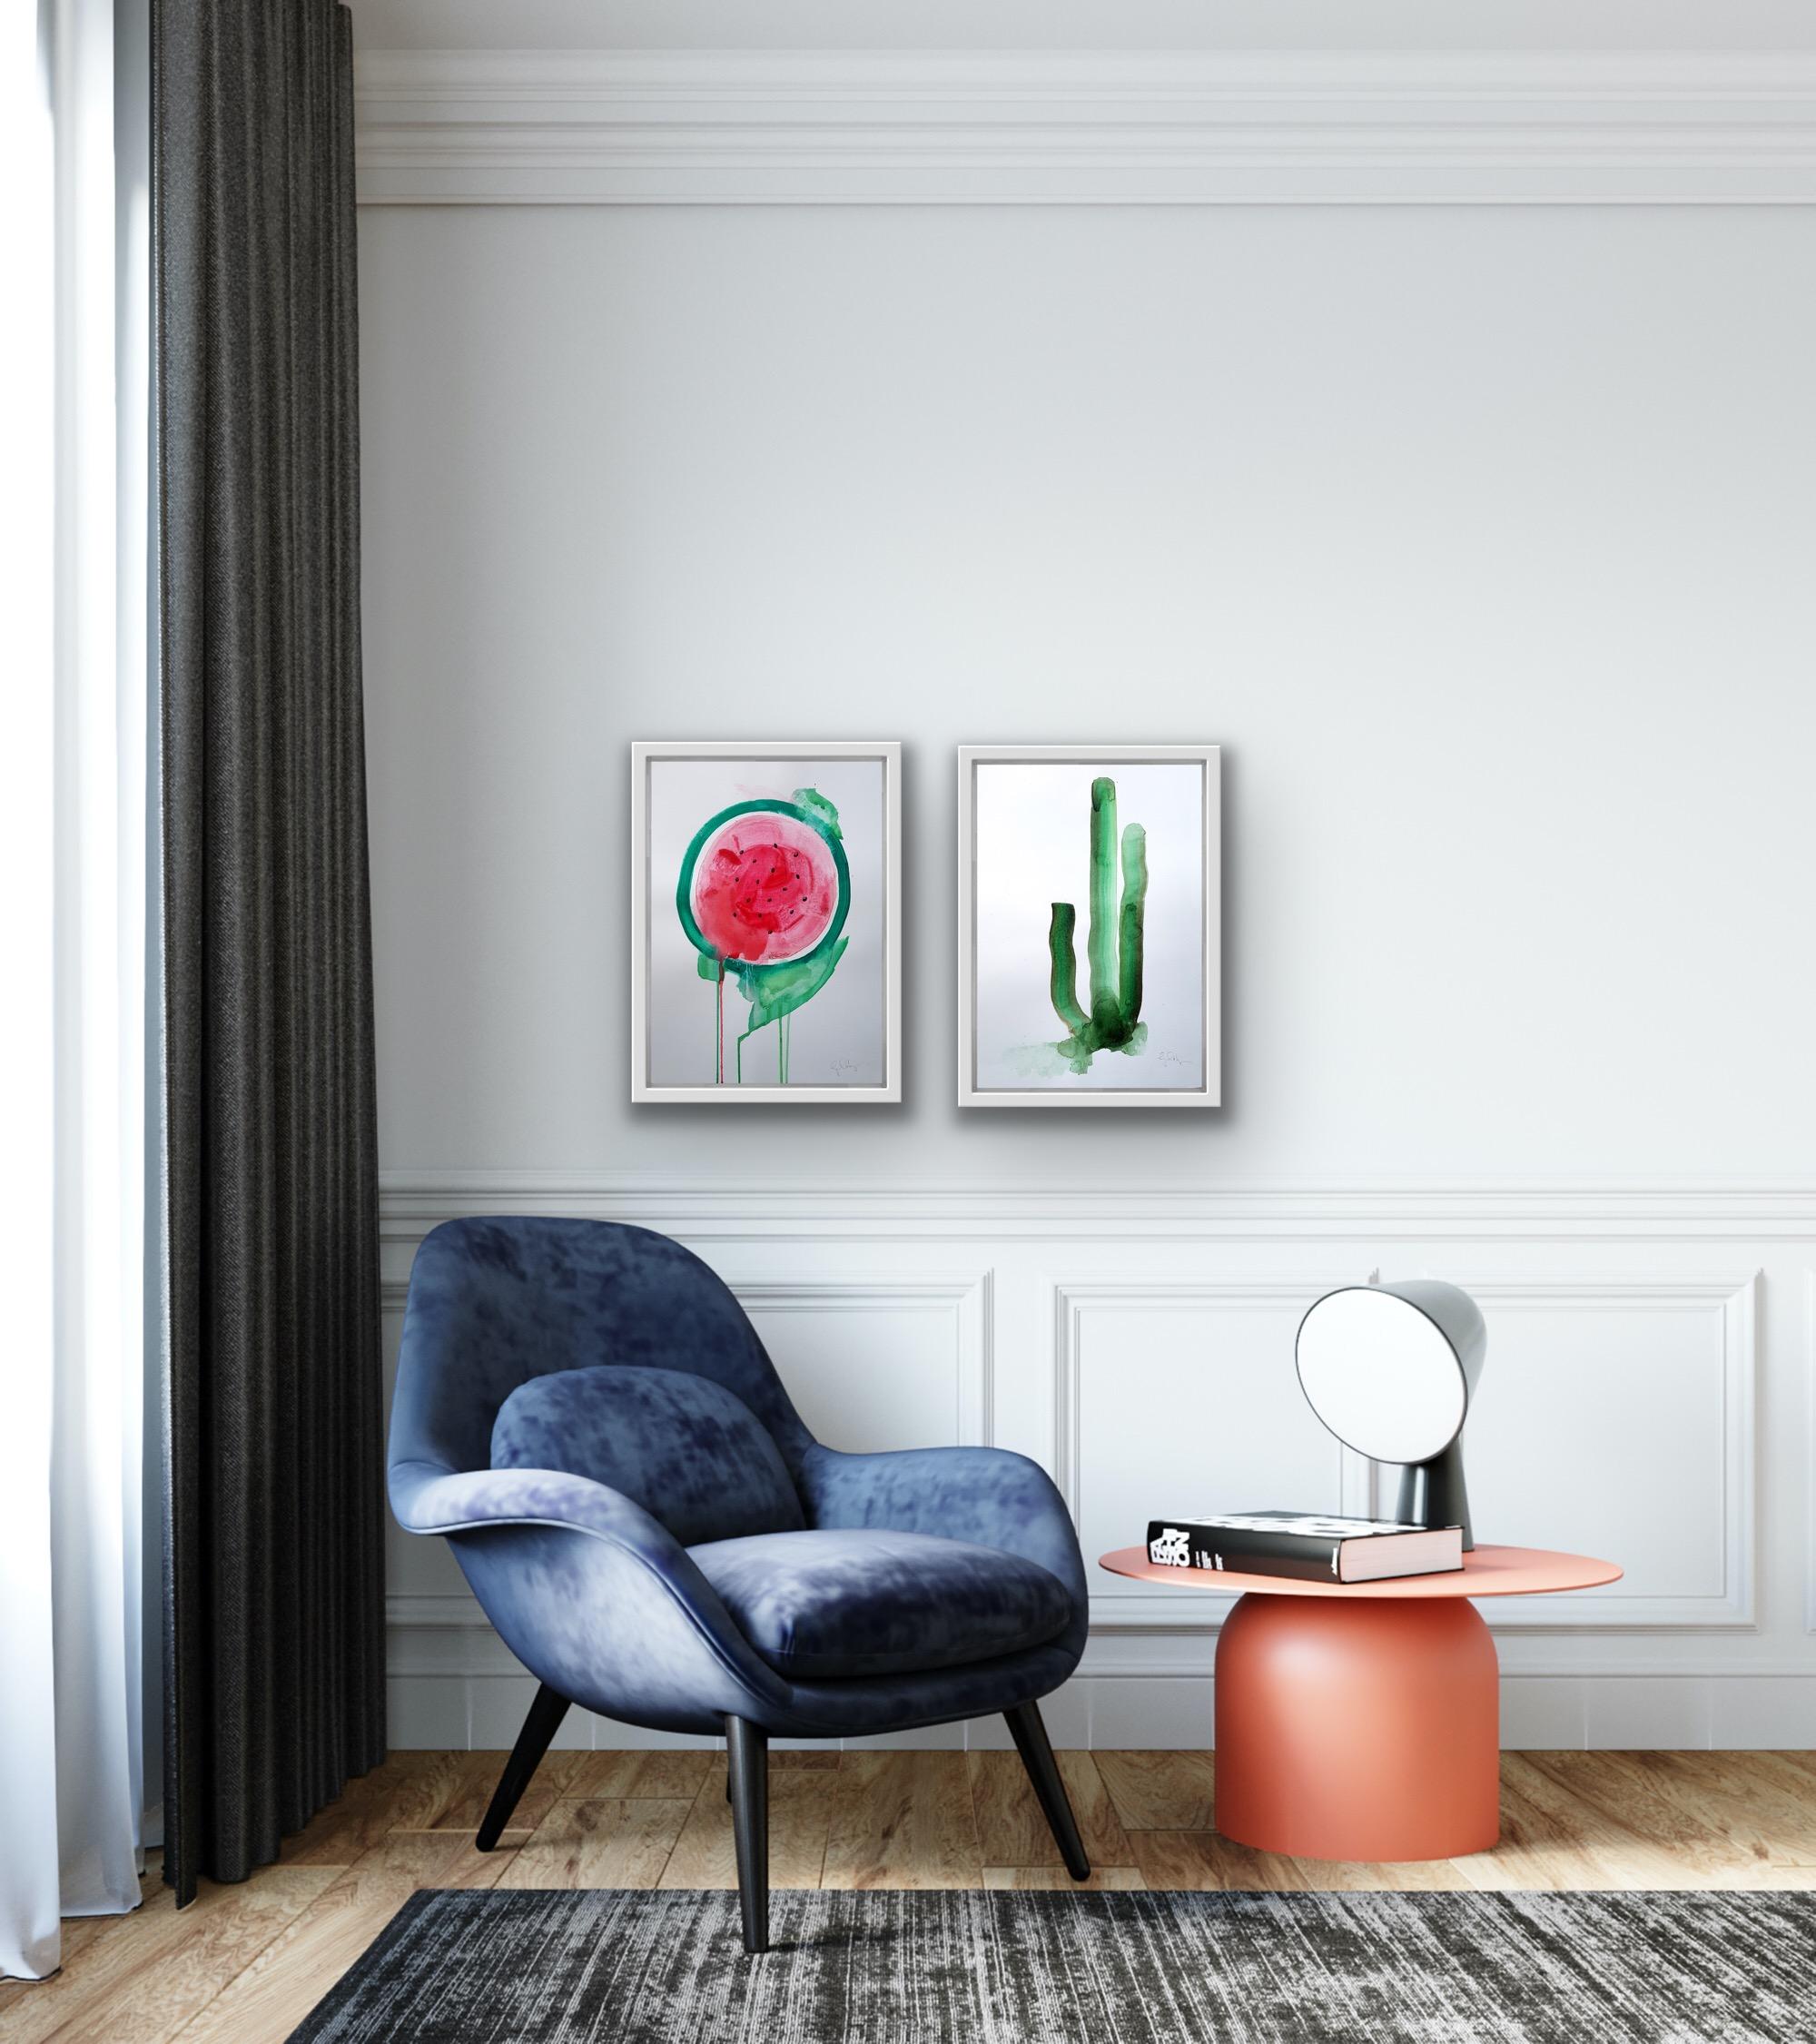 Watermelon and Cactus Painting Diptych - Art by Gavin Dobson